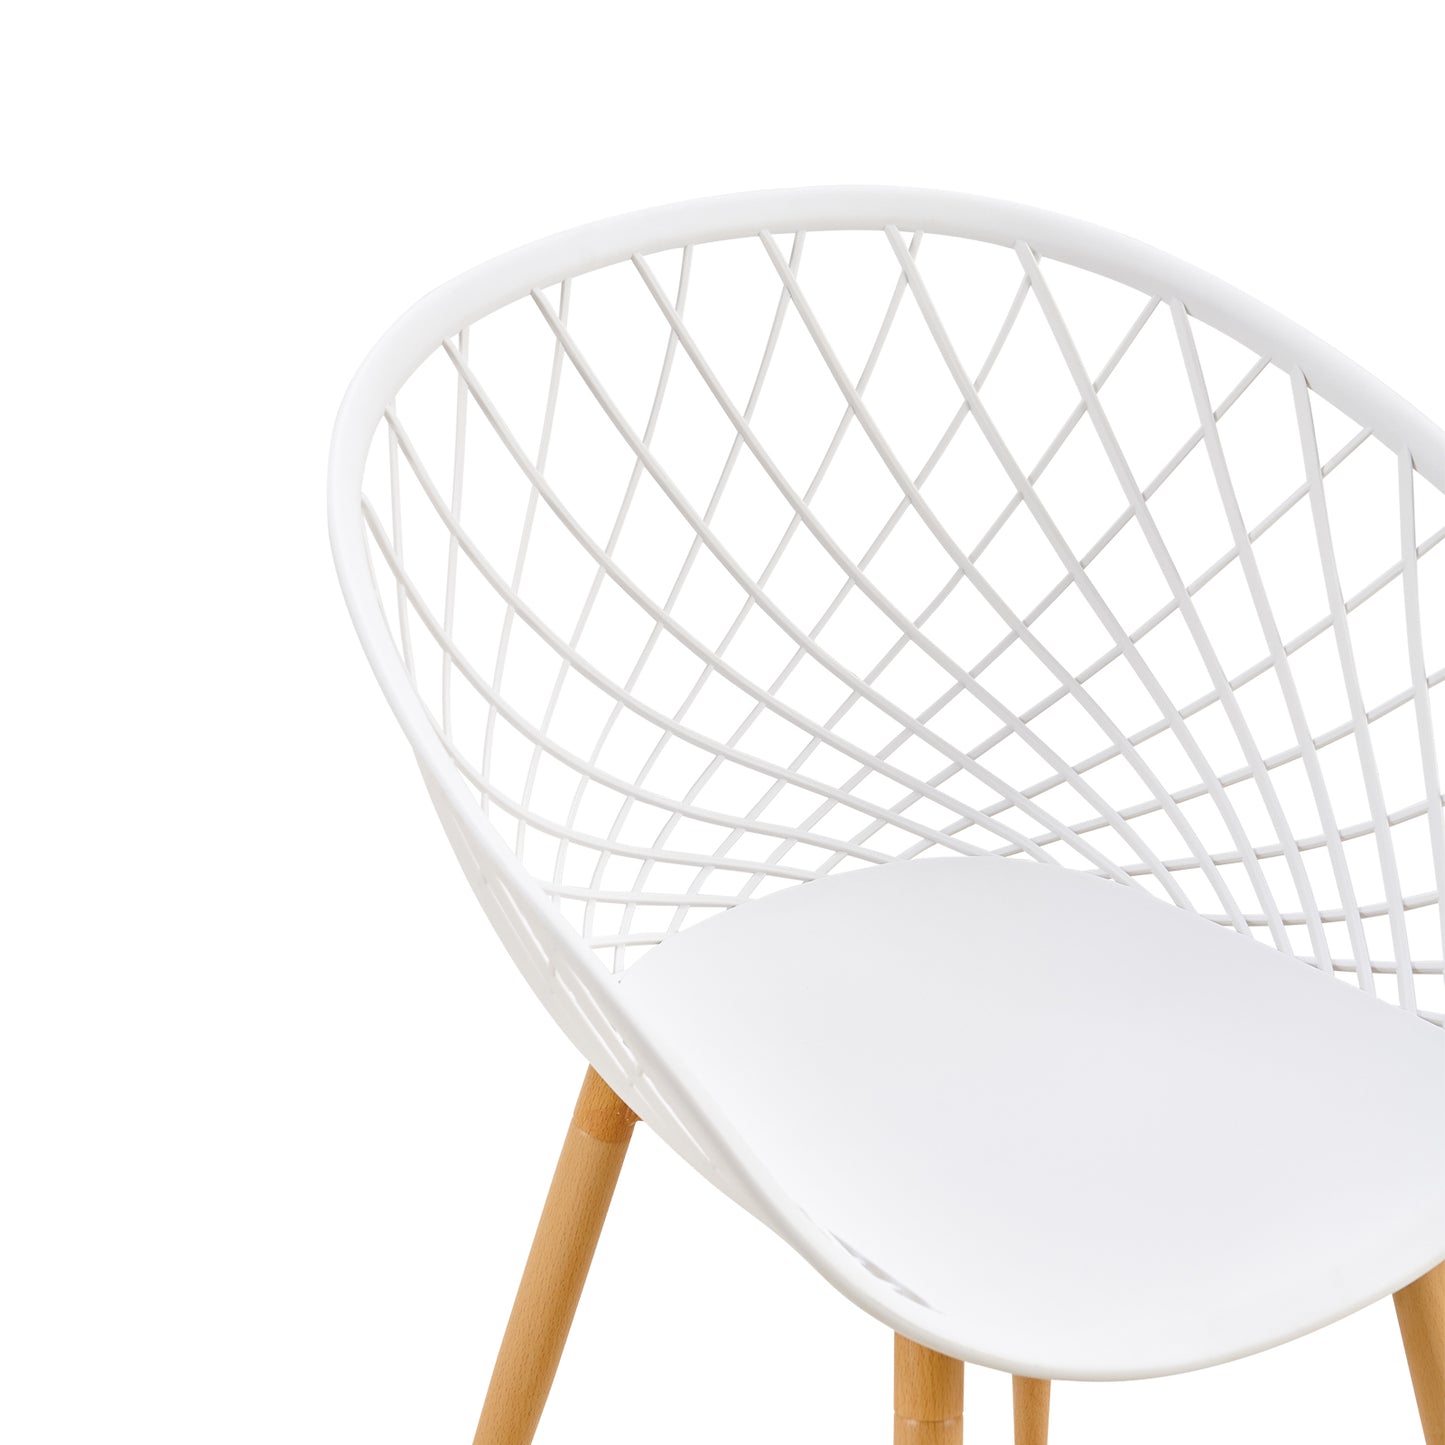 VERLOT Hollow Chair with Iron Legs - White